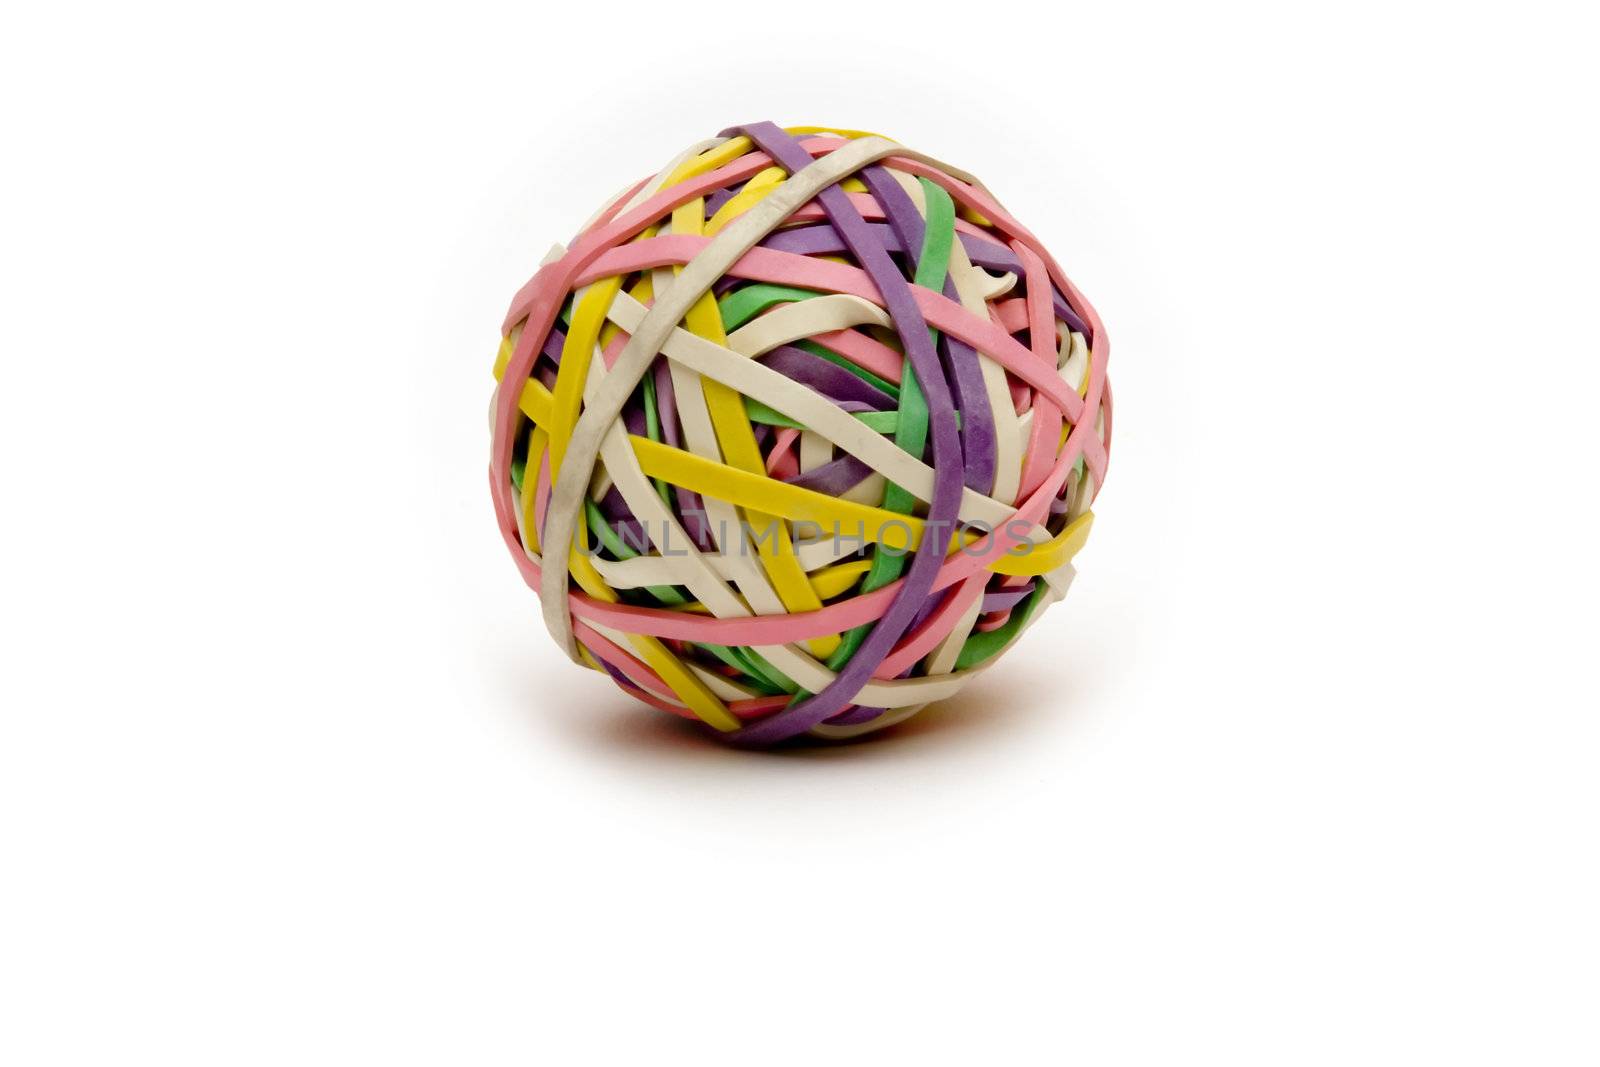 rubberband ball by snokid